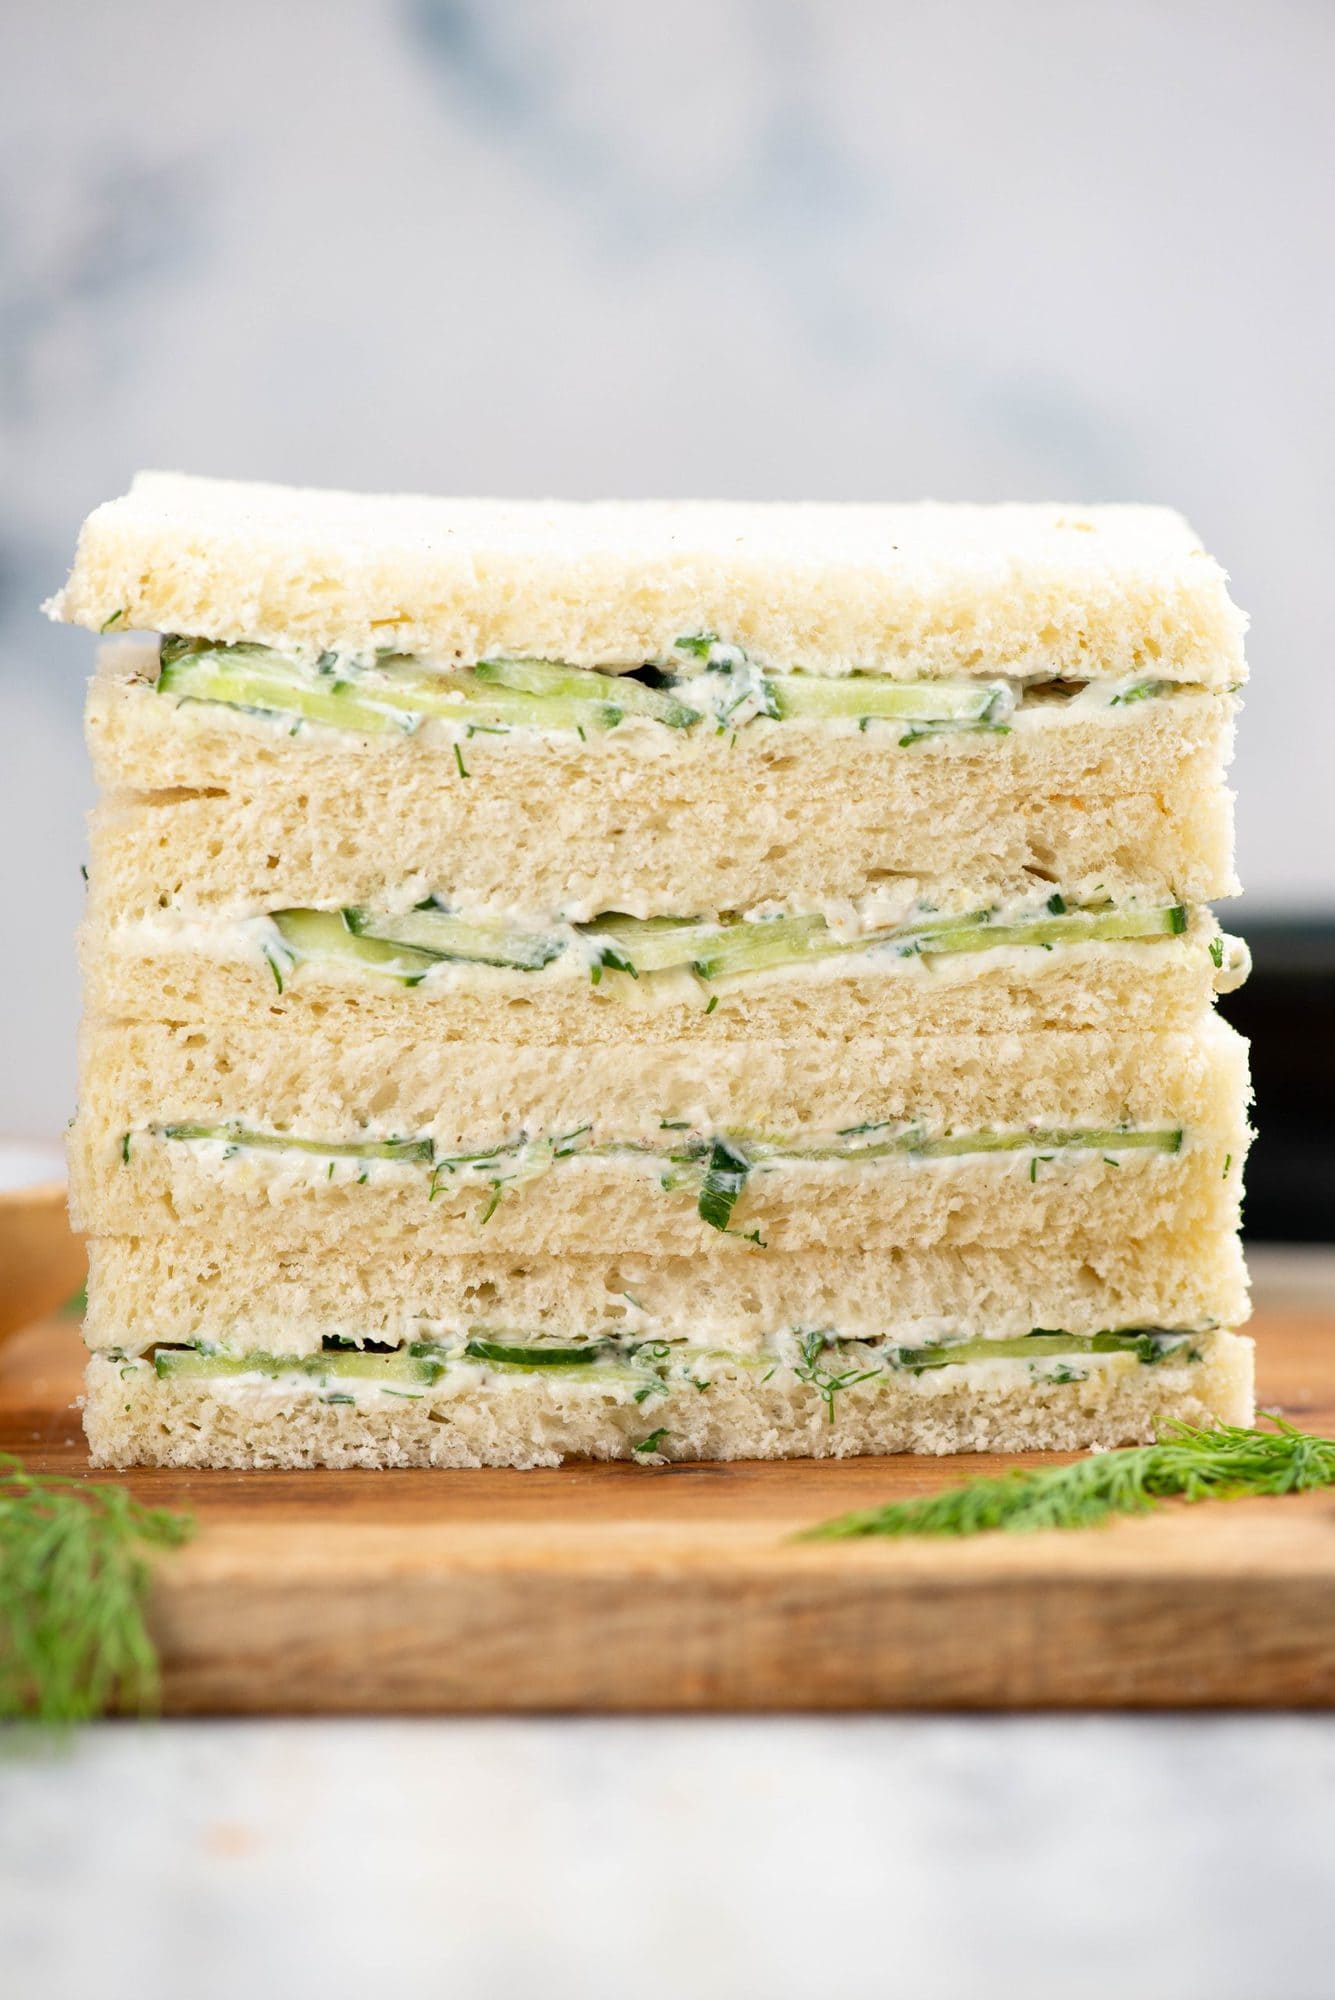 Stack of cucumber sandwiches with a creamy flavorful spread and sliced cucumber.